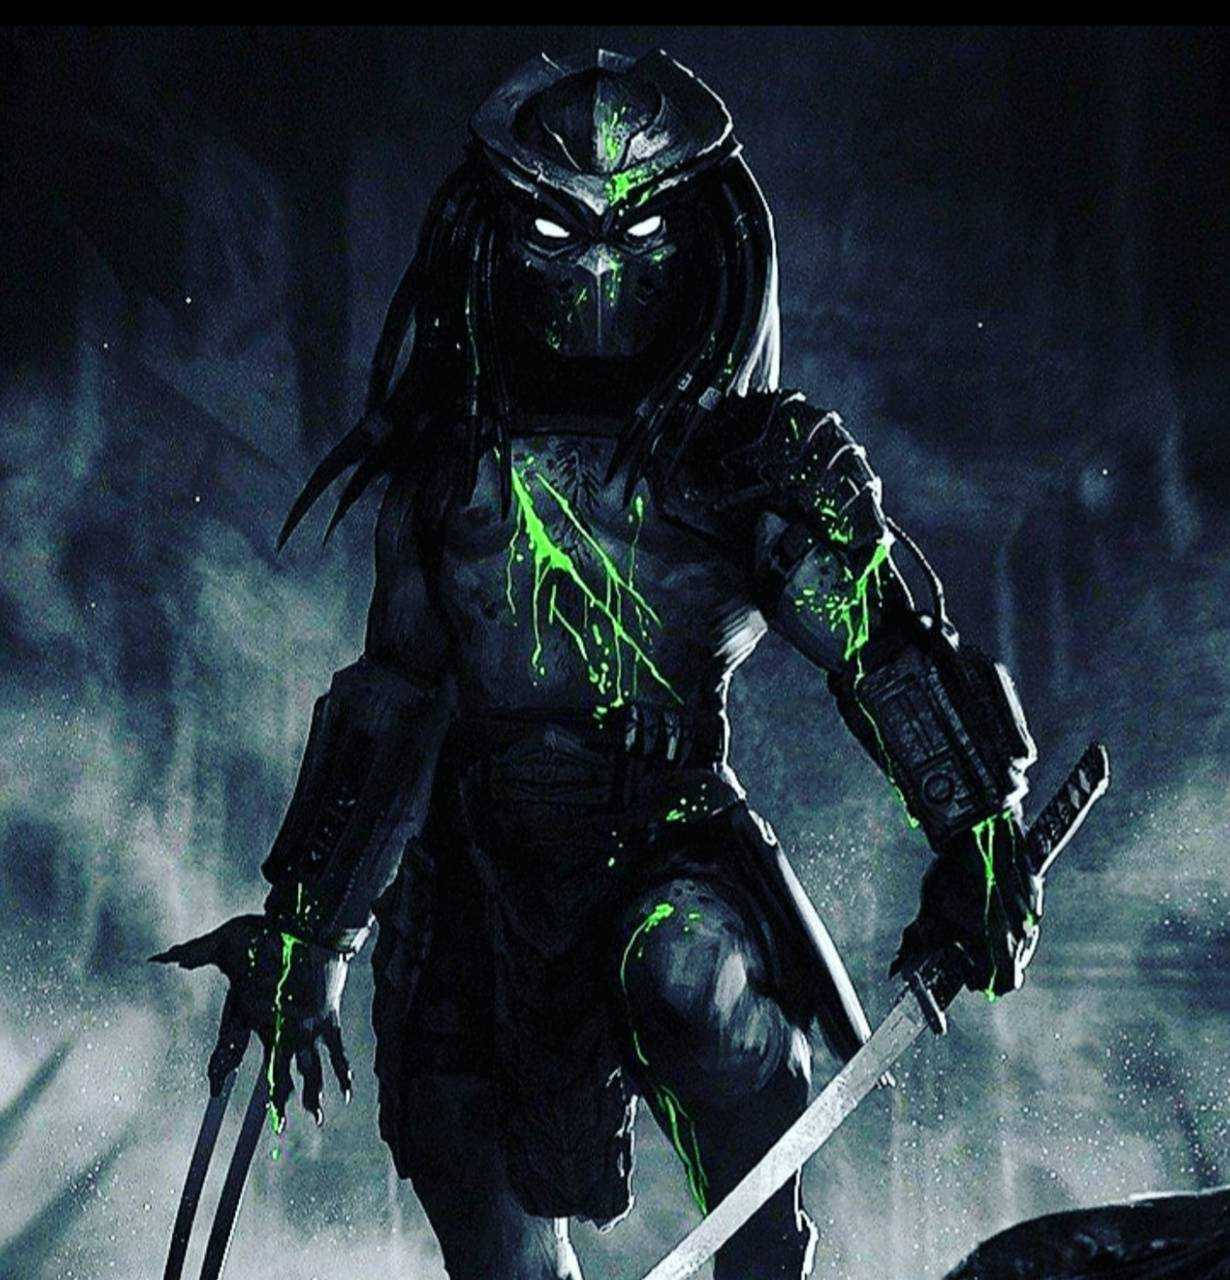 Predator Stepping Out - The Ultimate Alien Hunter